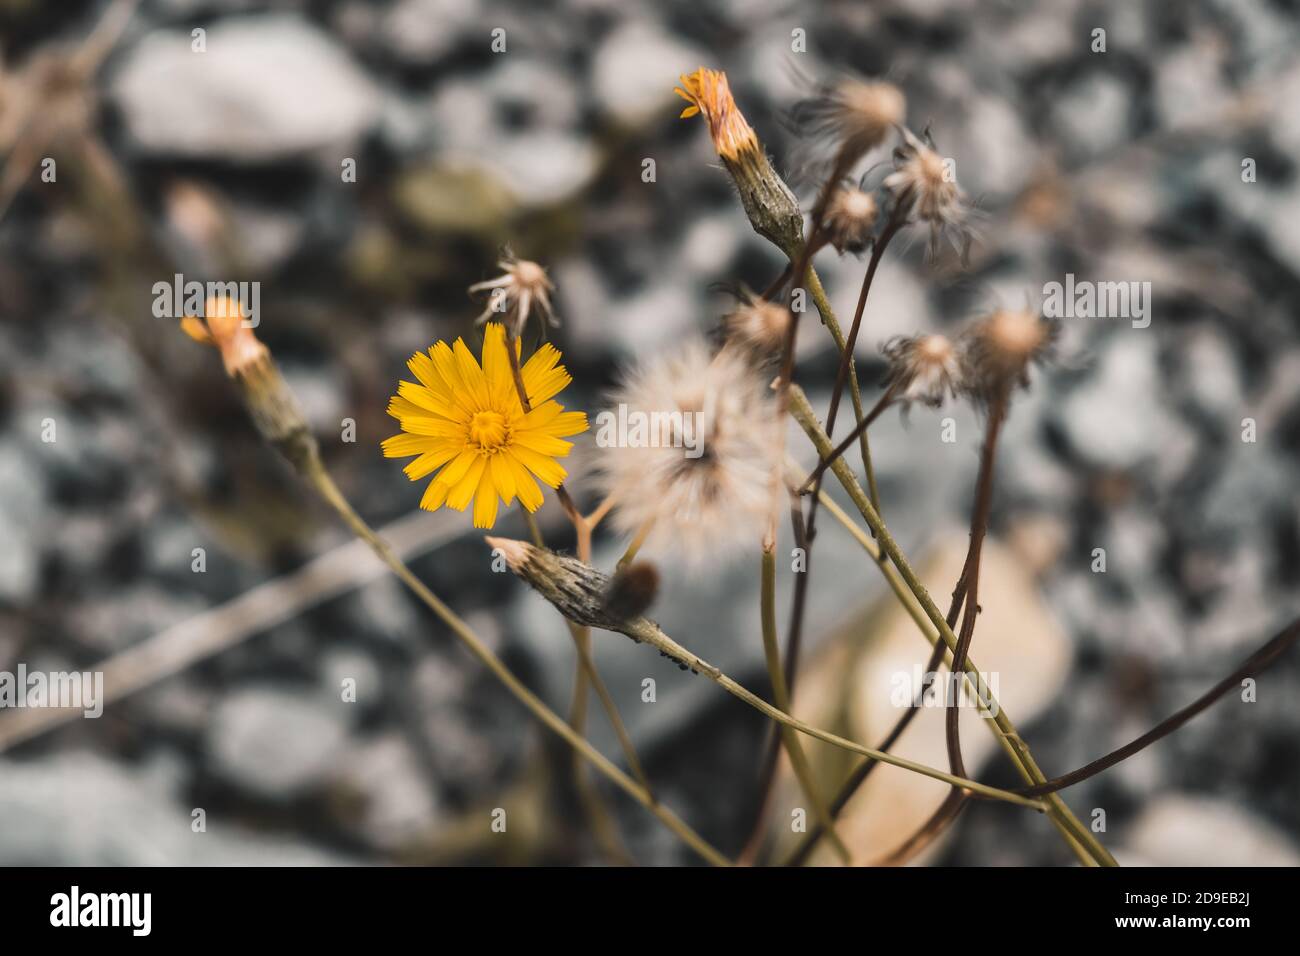 Two dandelions growing together. Yellow and white flowers in bloom. Old and young concept, evolution process, before and after a big life change. Stock Photo